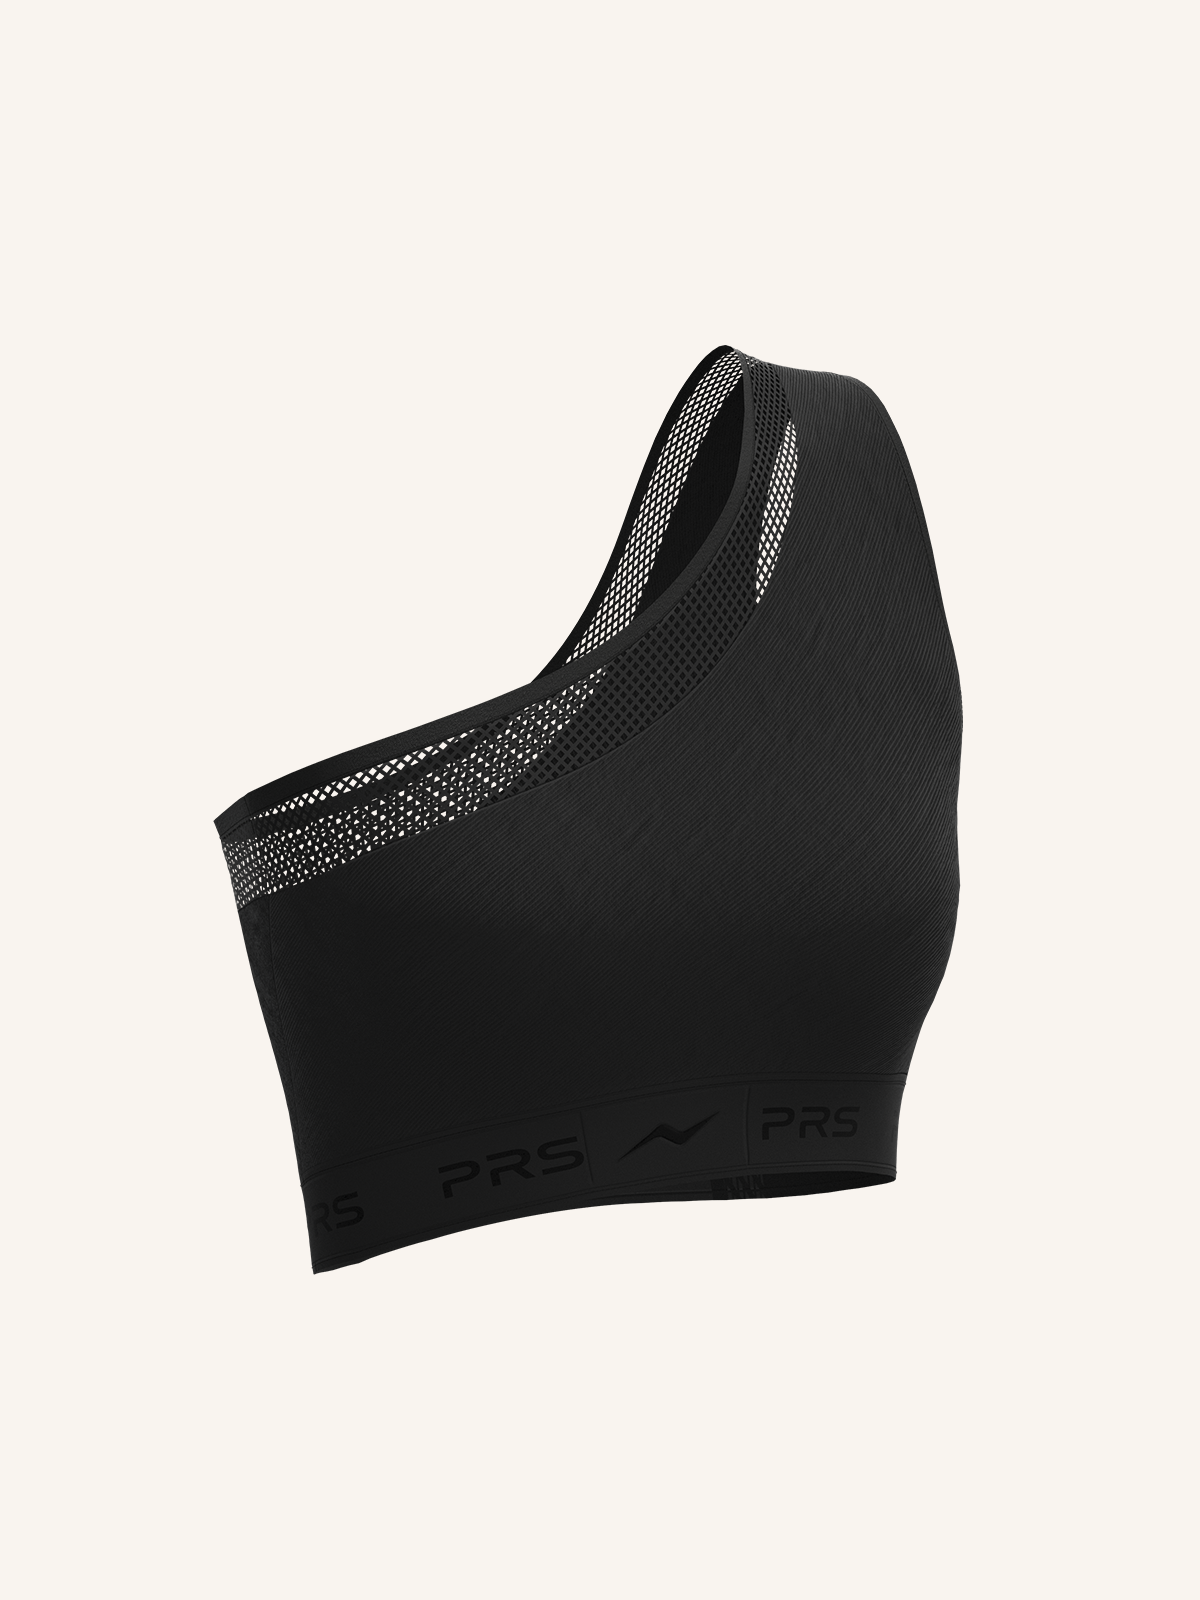 One Shoulder Running Top for Women | Single Pack | PRS PRO 500